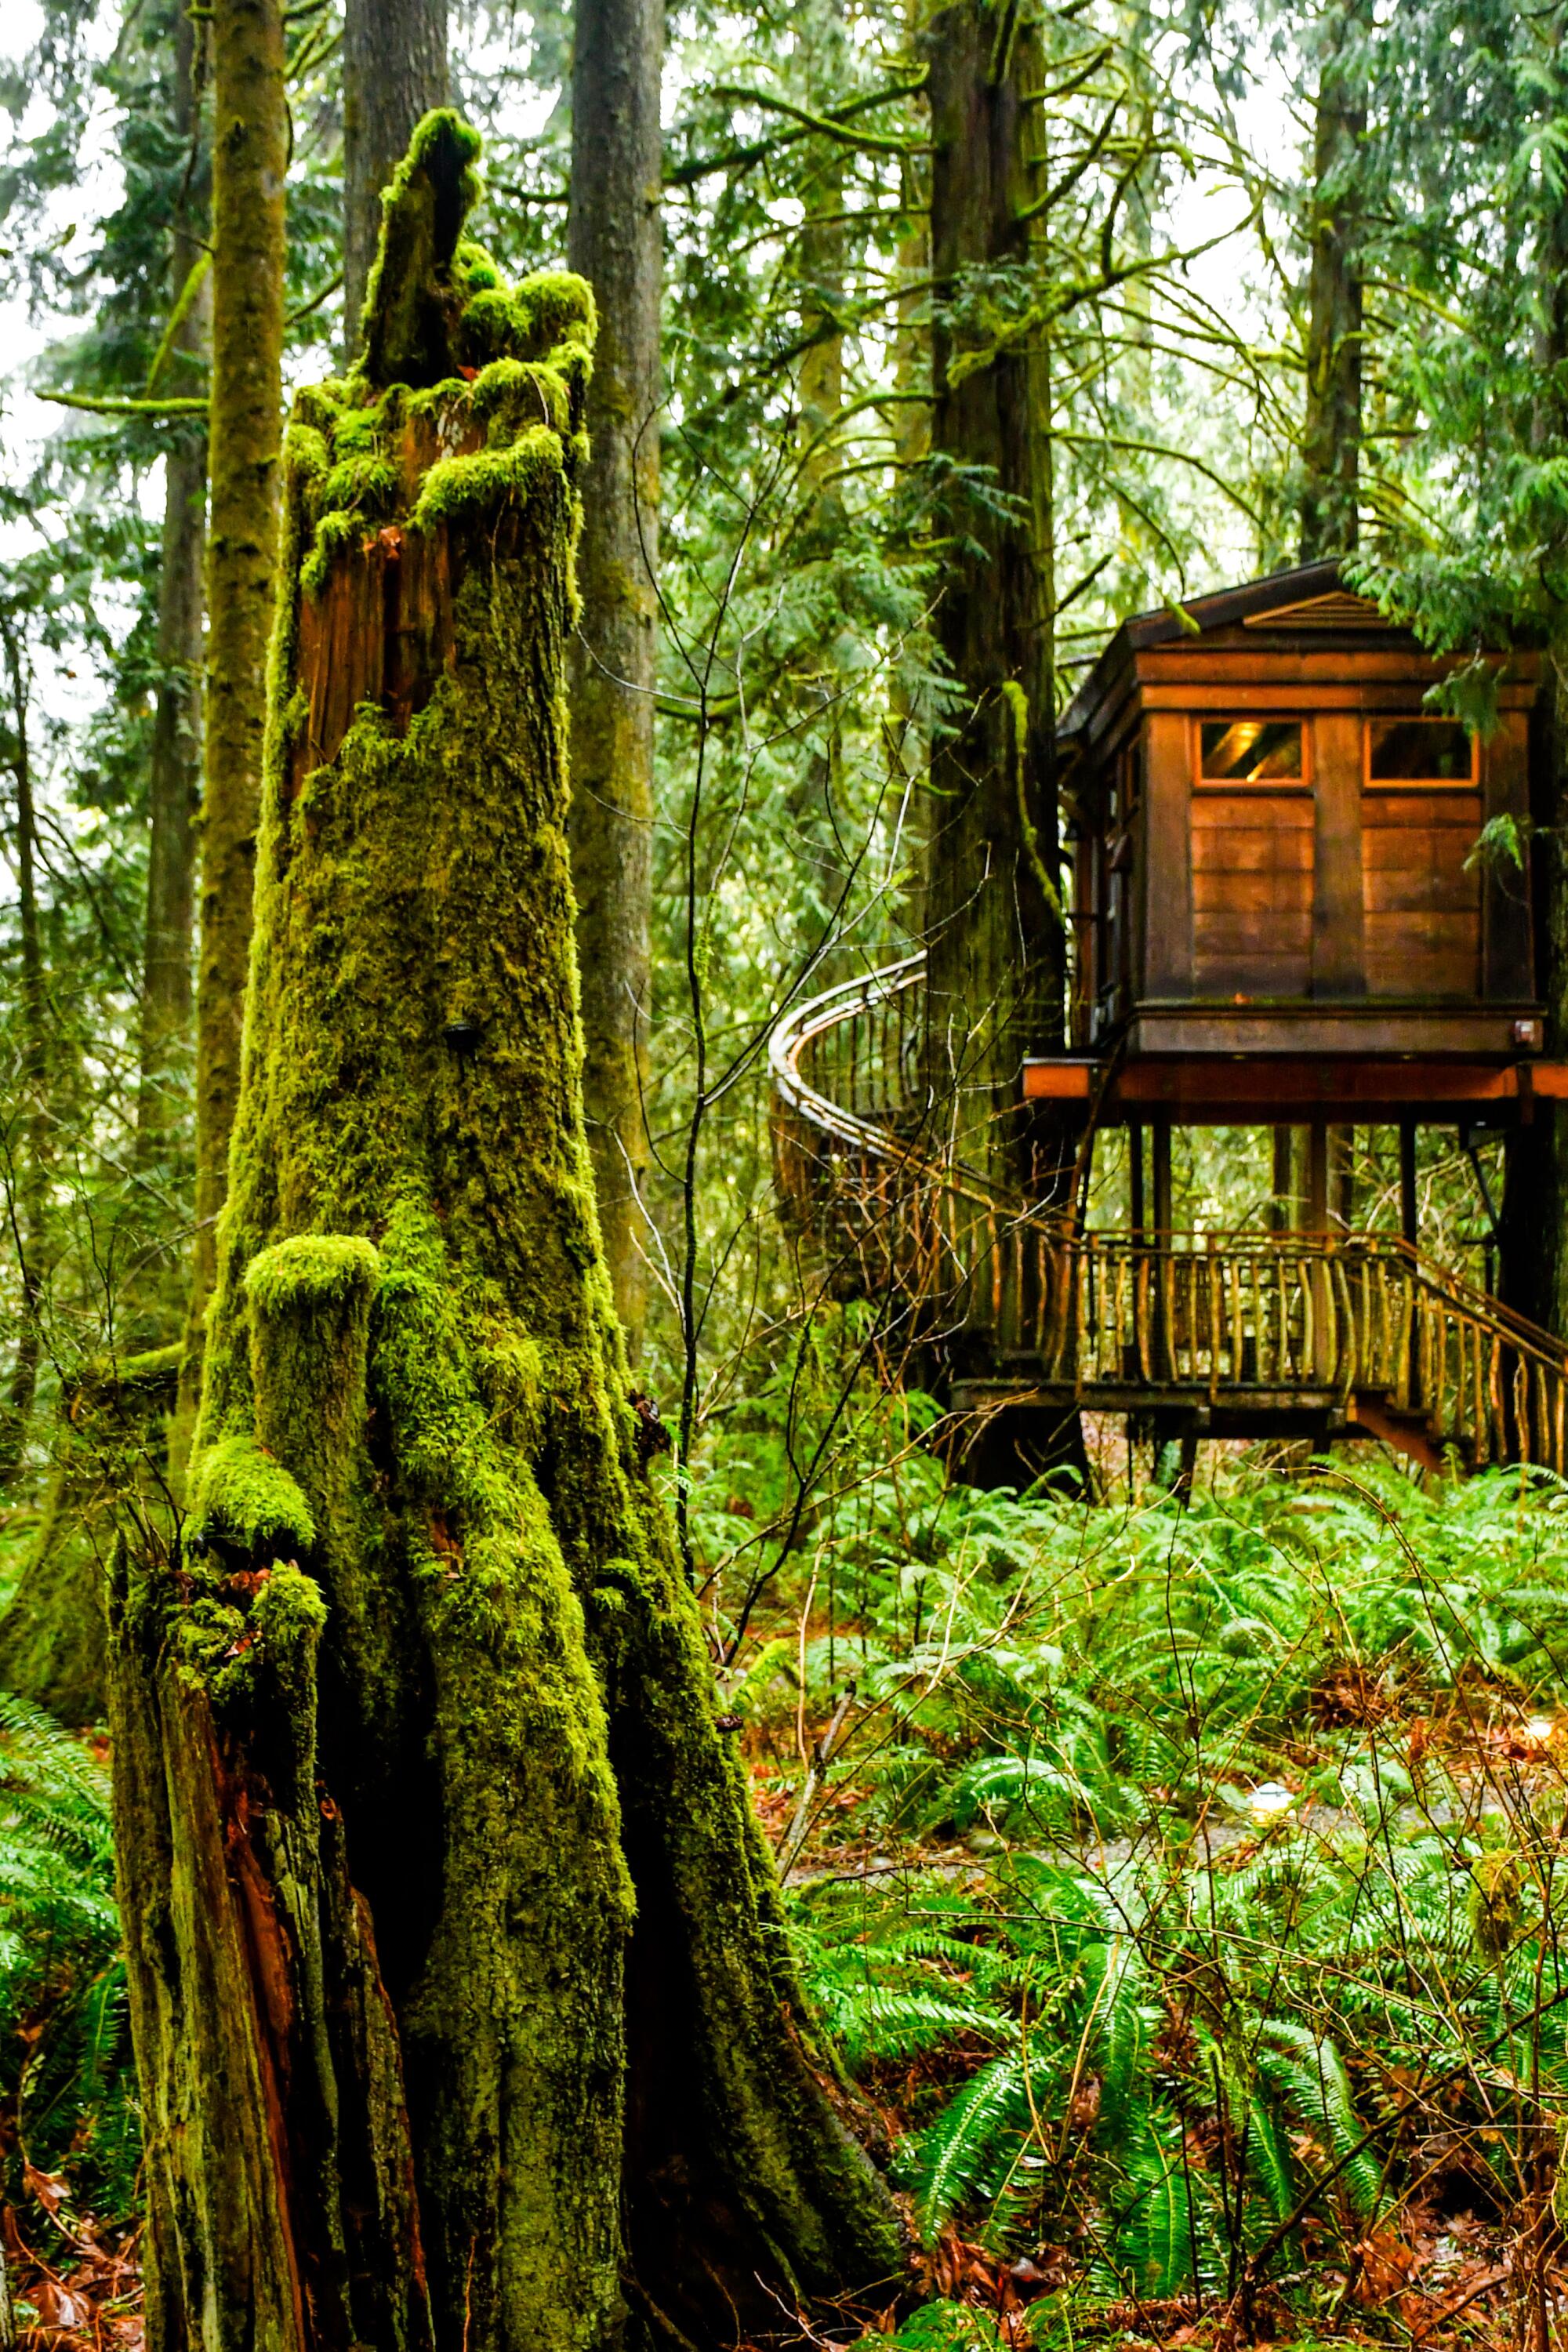 A treehouse amid a green forest near Seattle.